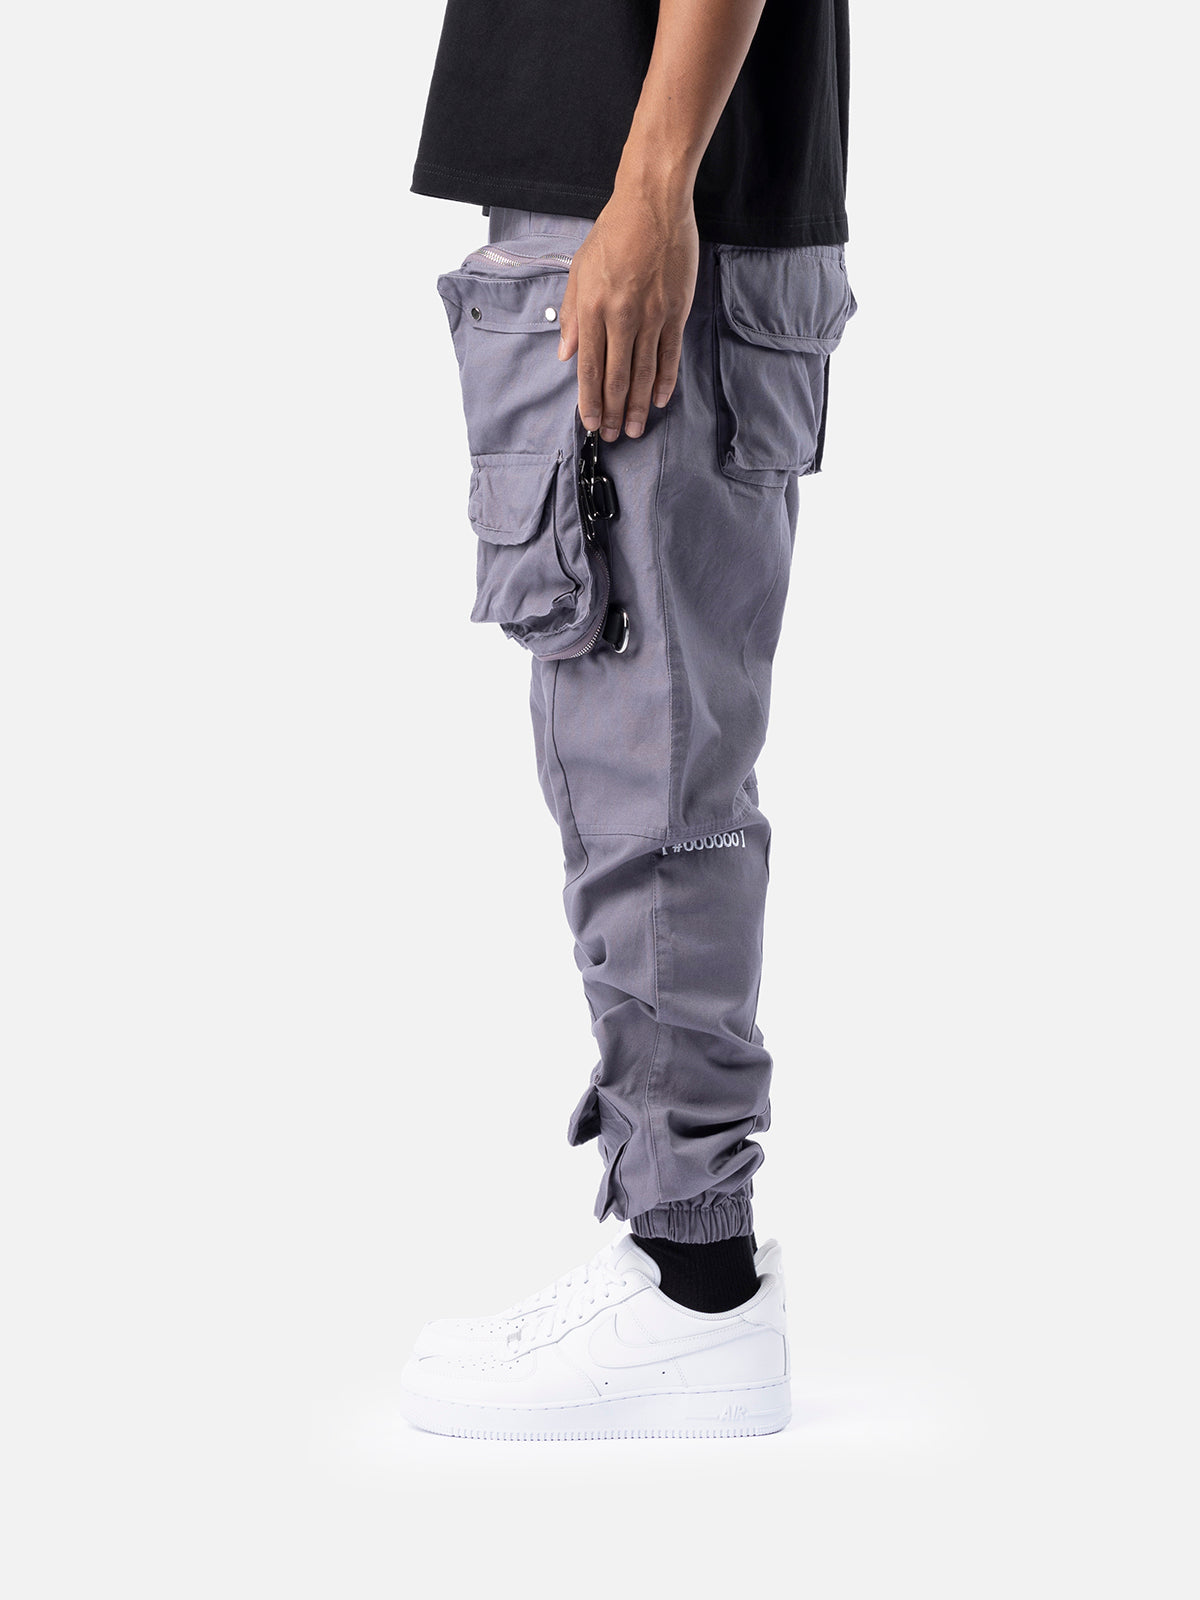 KOOLOSET】Purple Dying Curved Cargo Pants